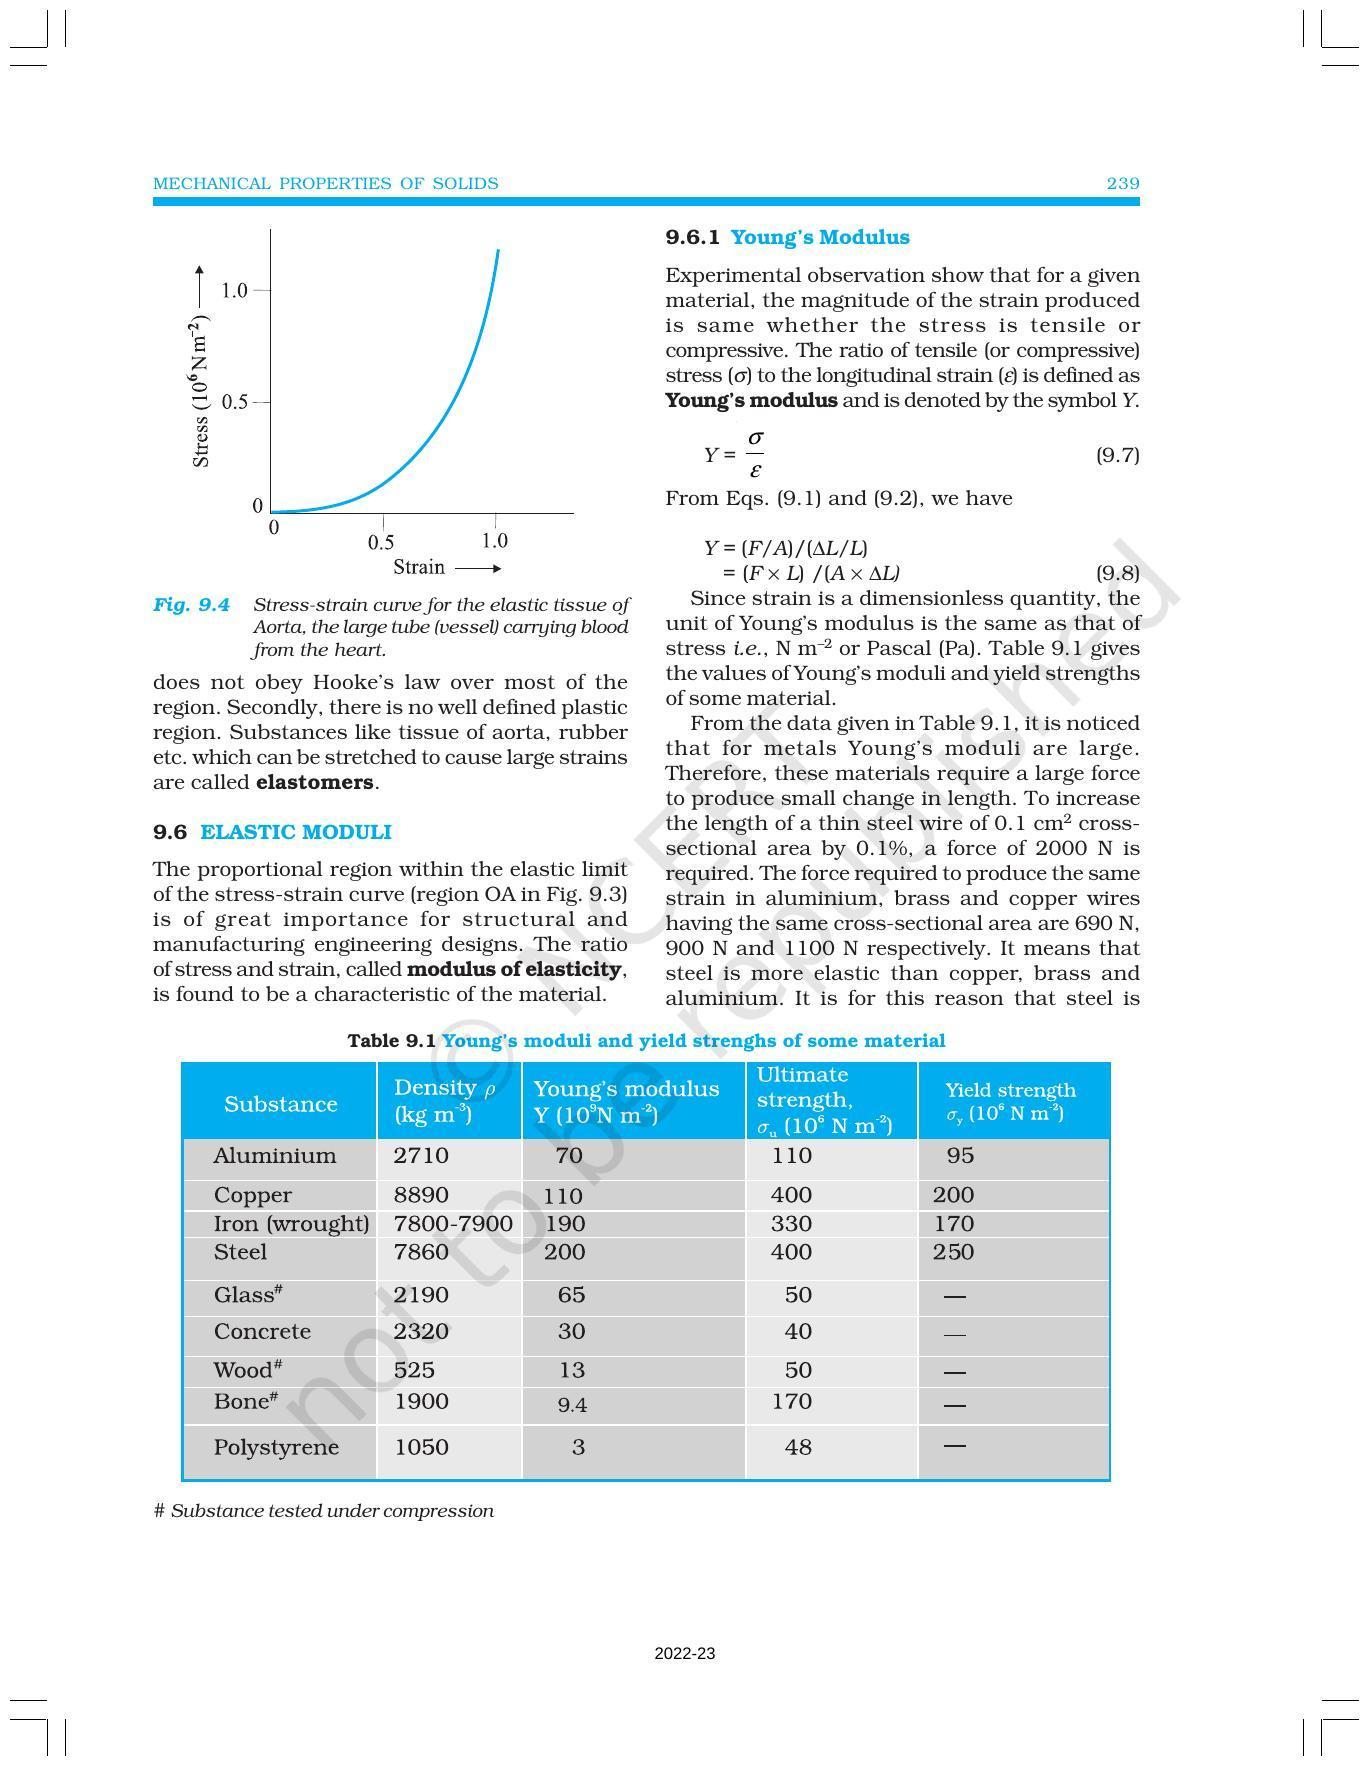 NCERT Book for Class 11 Physics Chapter 9 Mechanical Properties of Solids - Page 5